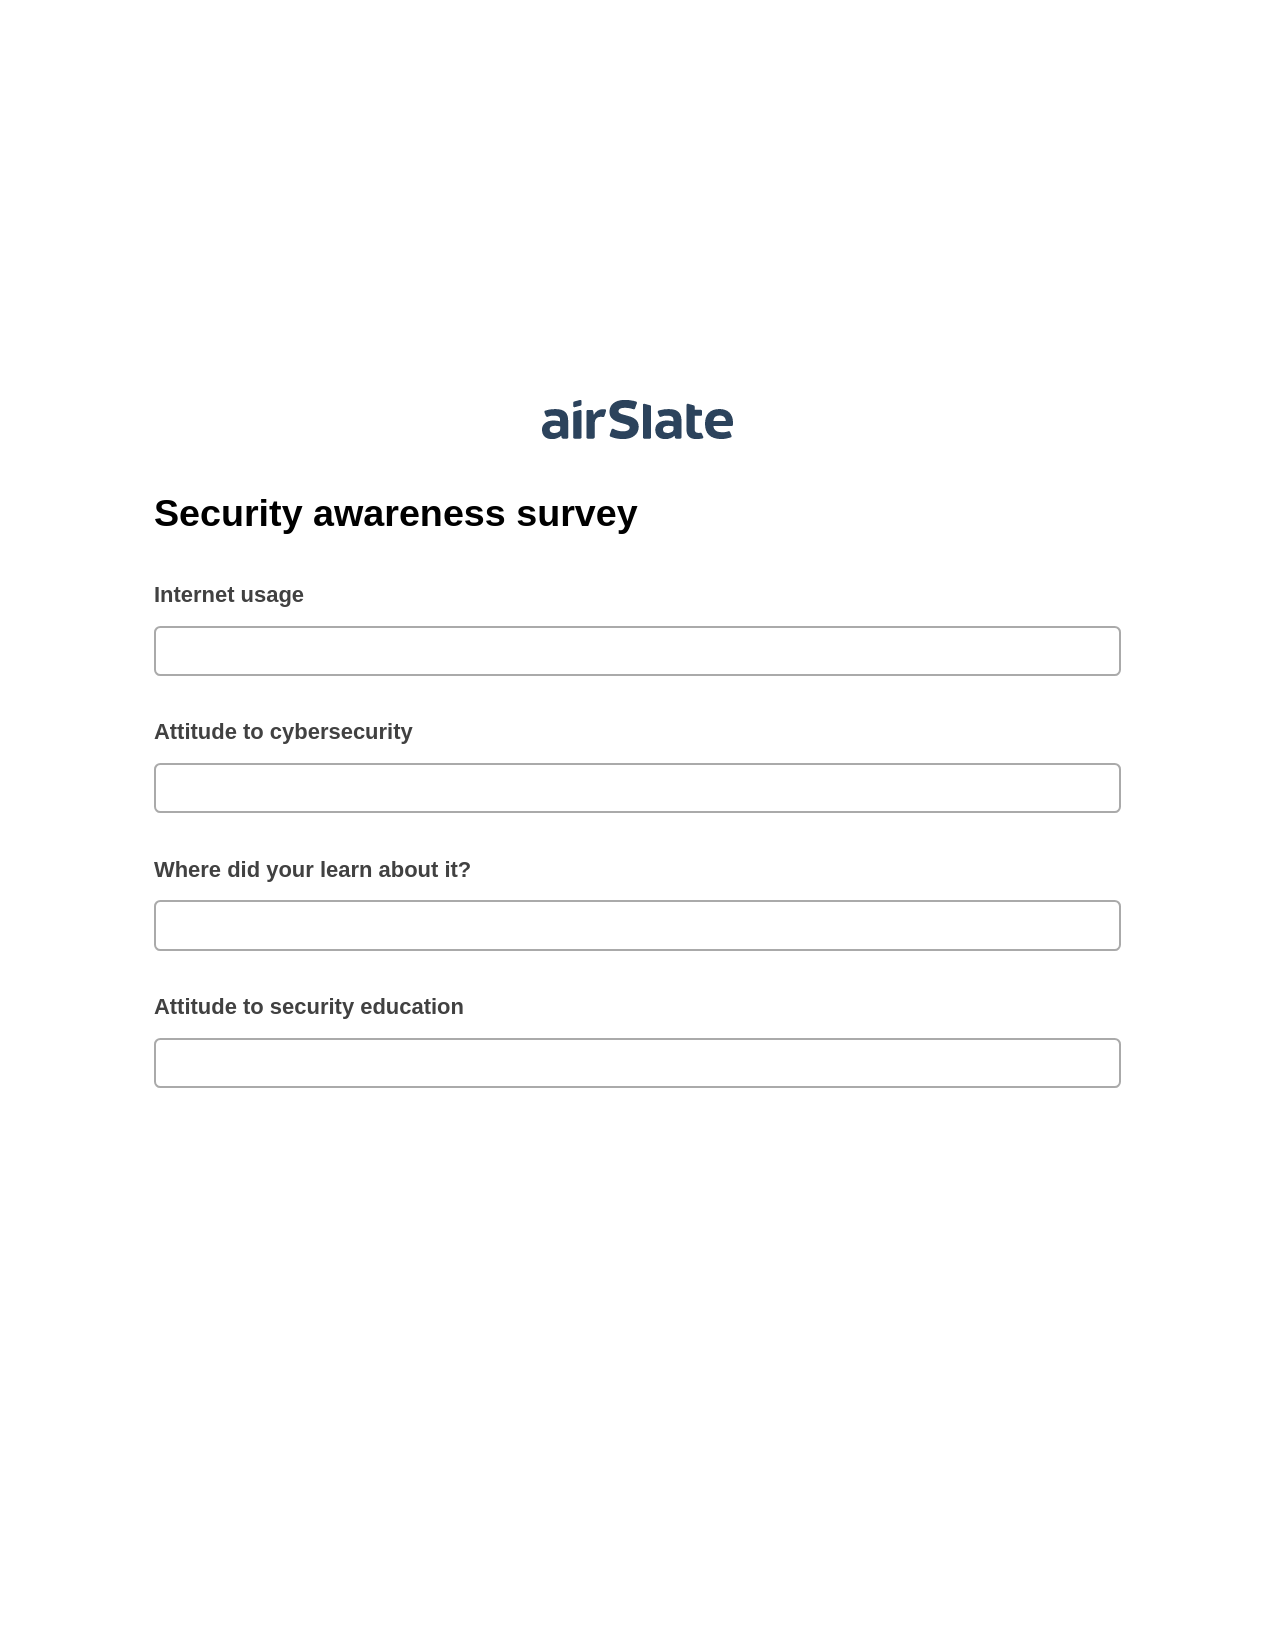 Multirole Security awareness survey Pre-fill from Salesforce Records with SOQL Bot, Open as Role Bot, Export to Excel 365 Bot